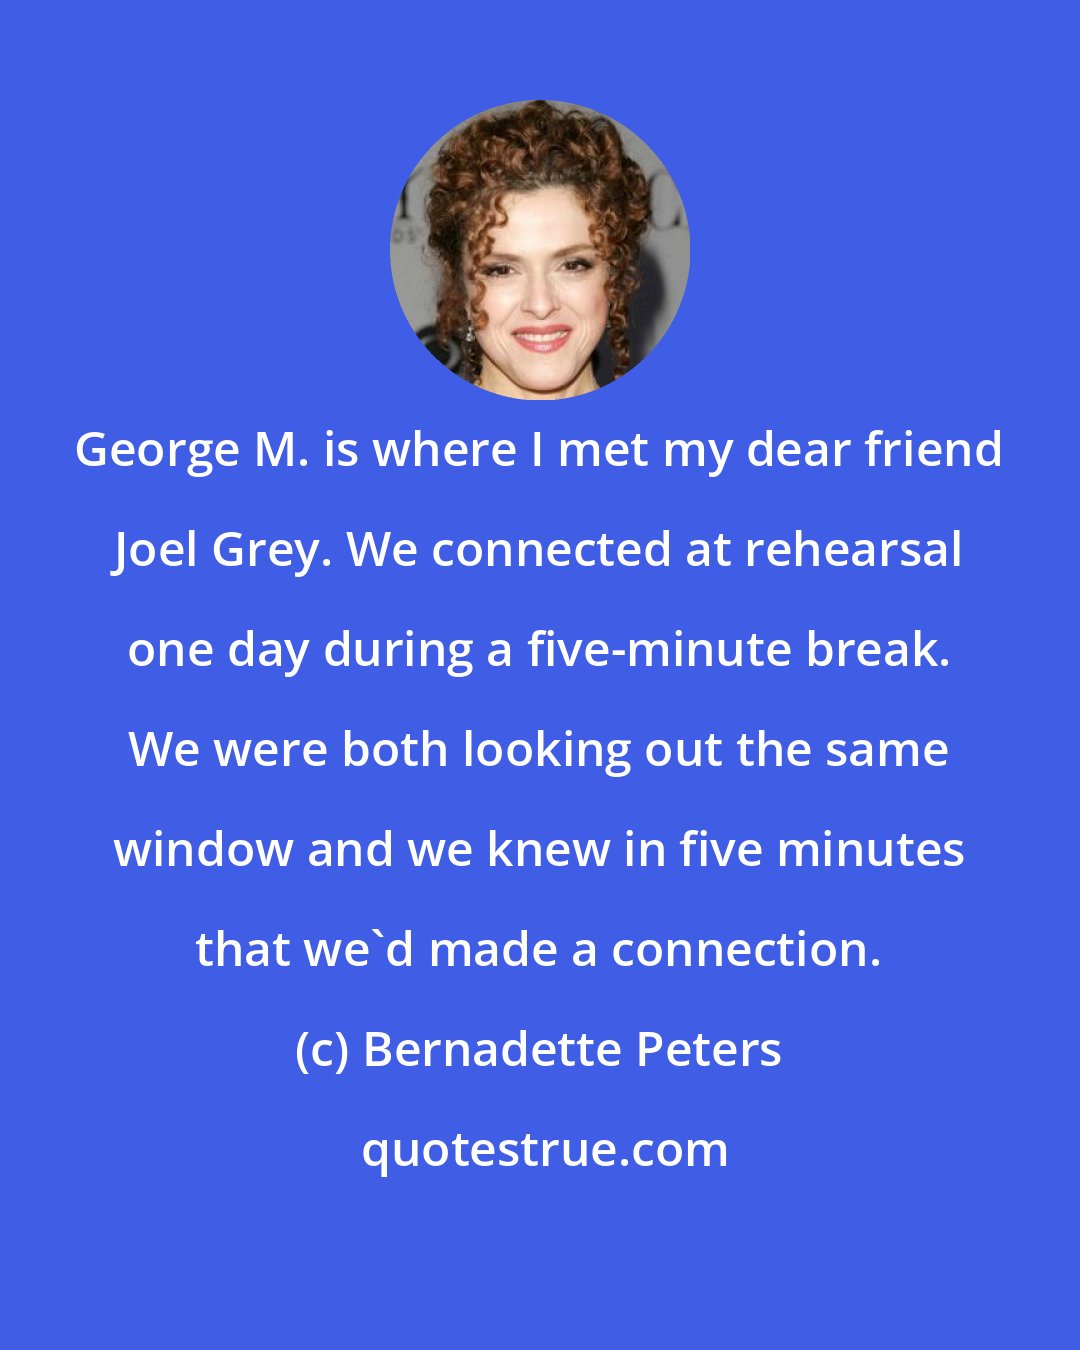 Bernadette Peters: George M. is where I met my dear friend Joel Grey. We connected at rehearsal one day during a five-minute break. We were both looking out the same window and we knew in five minutes that we'd made a connection.